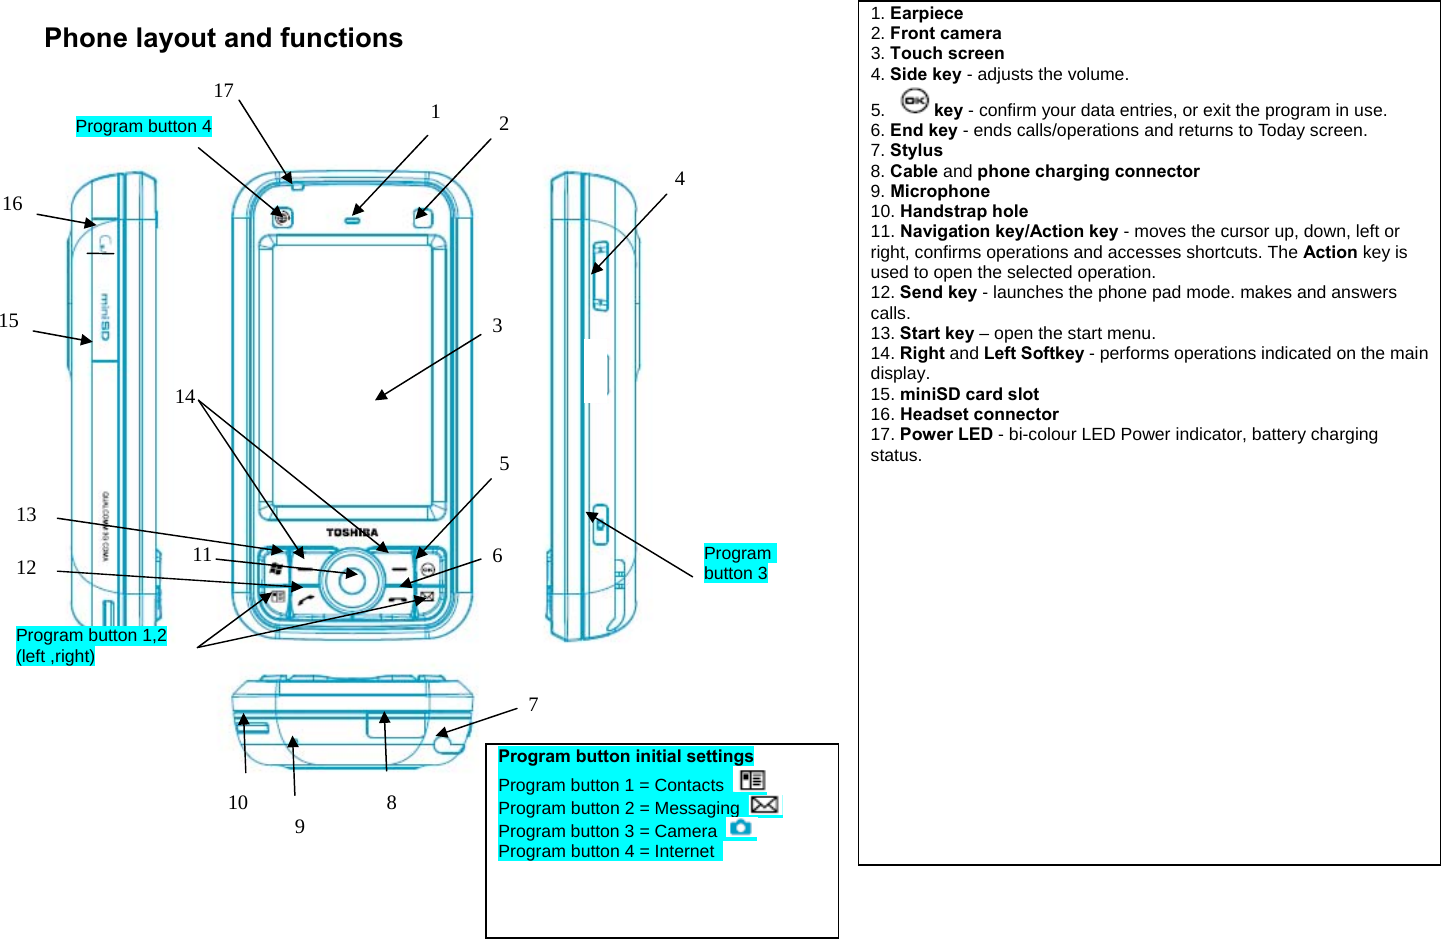  17 Phone layout and functions                                                     1. Earpiece 2. Front camera 3. Touch screen 4. Side key - adjusts the volume. 5. key - confirm your data entries, or exit the program in use. 6. End key - ends calls/operations and returns to Today screen. 7. Stylus 8. Cable and phone charging connector 9. Microphone 10. Handstrap hole 11. Navigation key/Action key - moves the cursor up, down, left or right, confirms operations and accesses shortcuts. The Action key is used to open the selected operation. 12. Send key - launches the phone pad mode. makes and answers calls. 13. Start key – open the start menu. 14. Right and Left Softkey - performs operations indicated on the main display. 15. miniSD card slot 16. Headset connector 17. Power LED - bi-colour LED Power indicator, battery charging status.   Program button initial settings Program button 1 = Contacts   Program button 2 = Messaging   Program button 3 = Camera   Program button 4 = Internet   1  2 3 4 5 Program button 3 14 Program button 1,2 (left ,right) Program button 4 6 7 8 9 10 11 12 13 17 15 16 